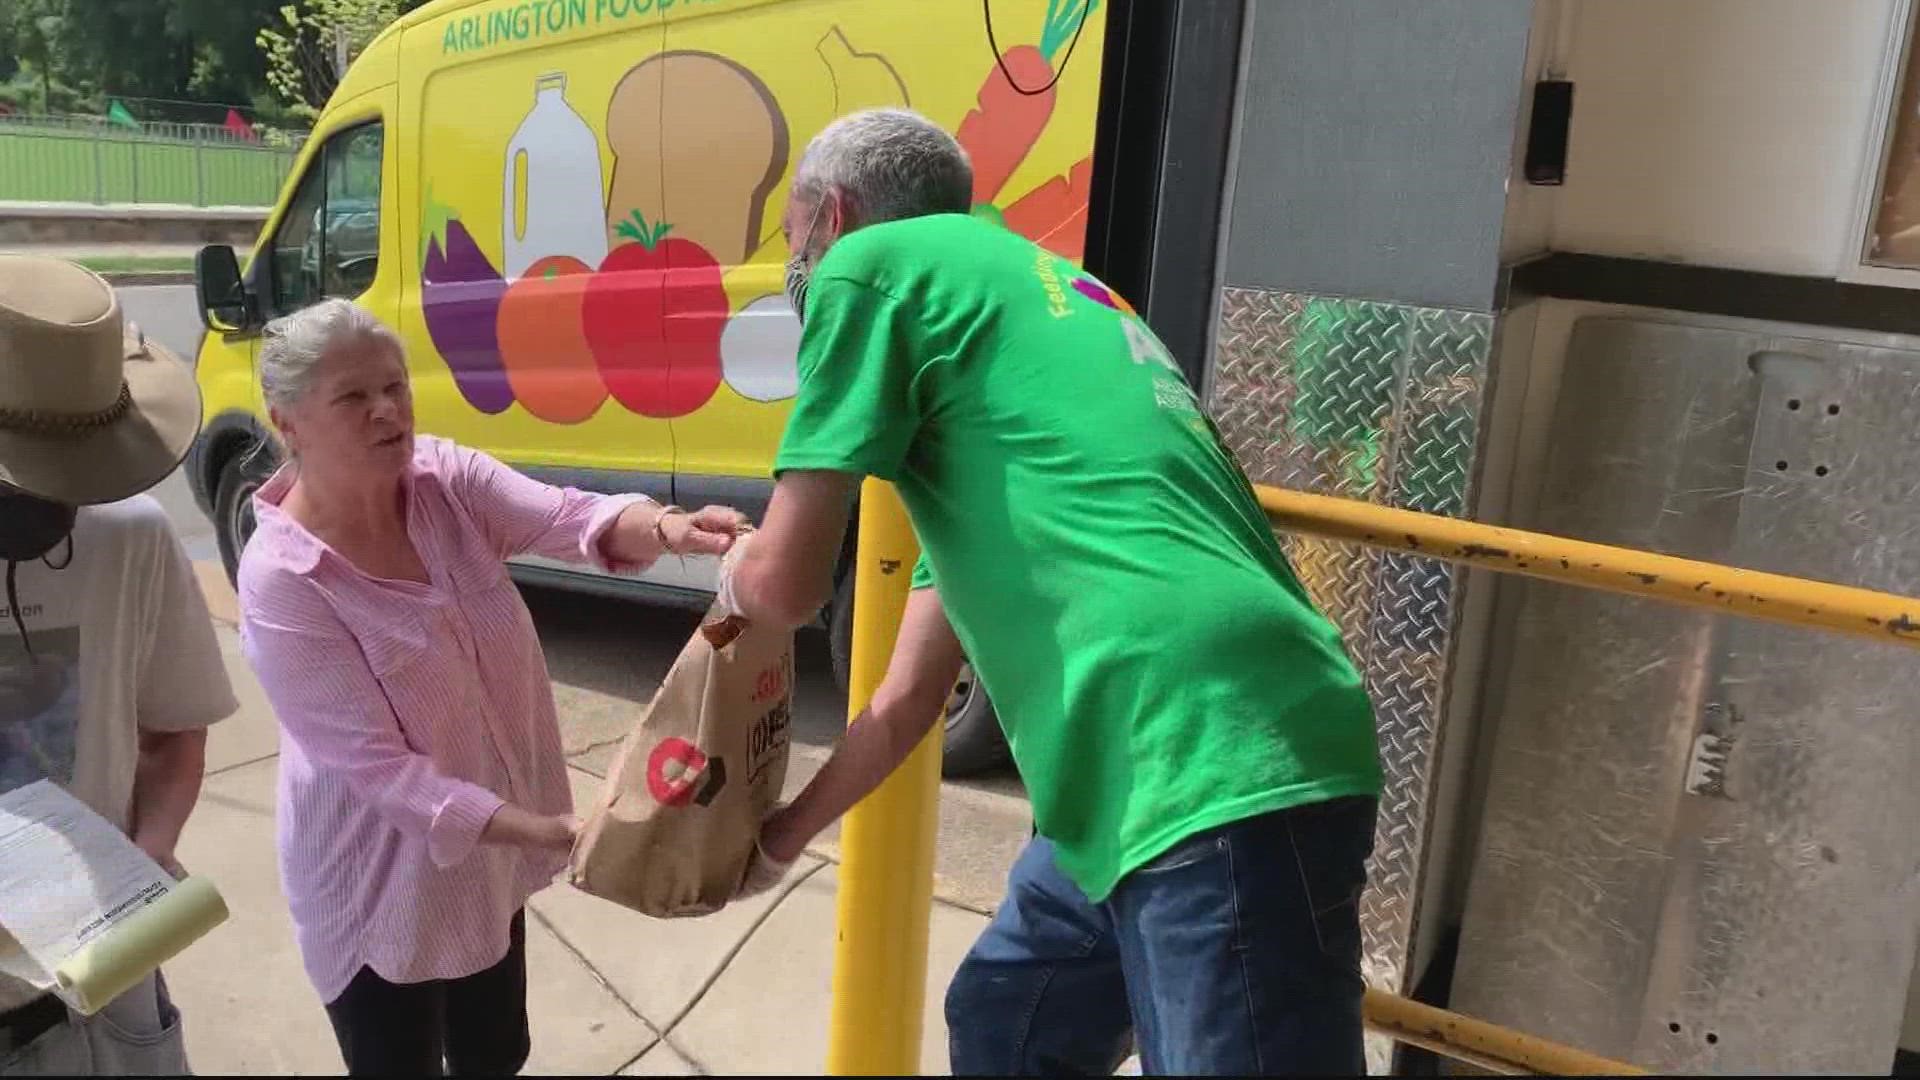 The Arlington Food Assistance Center helps feed hungry families in the community